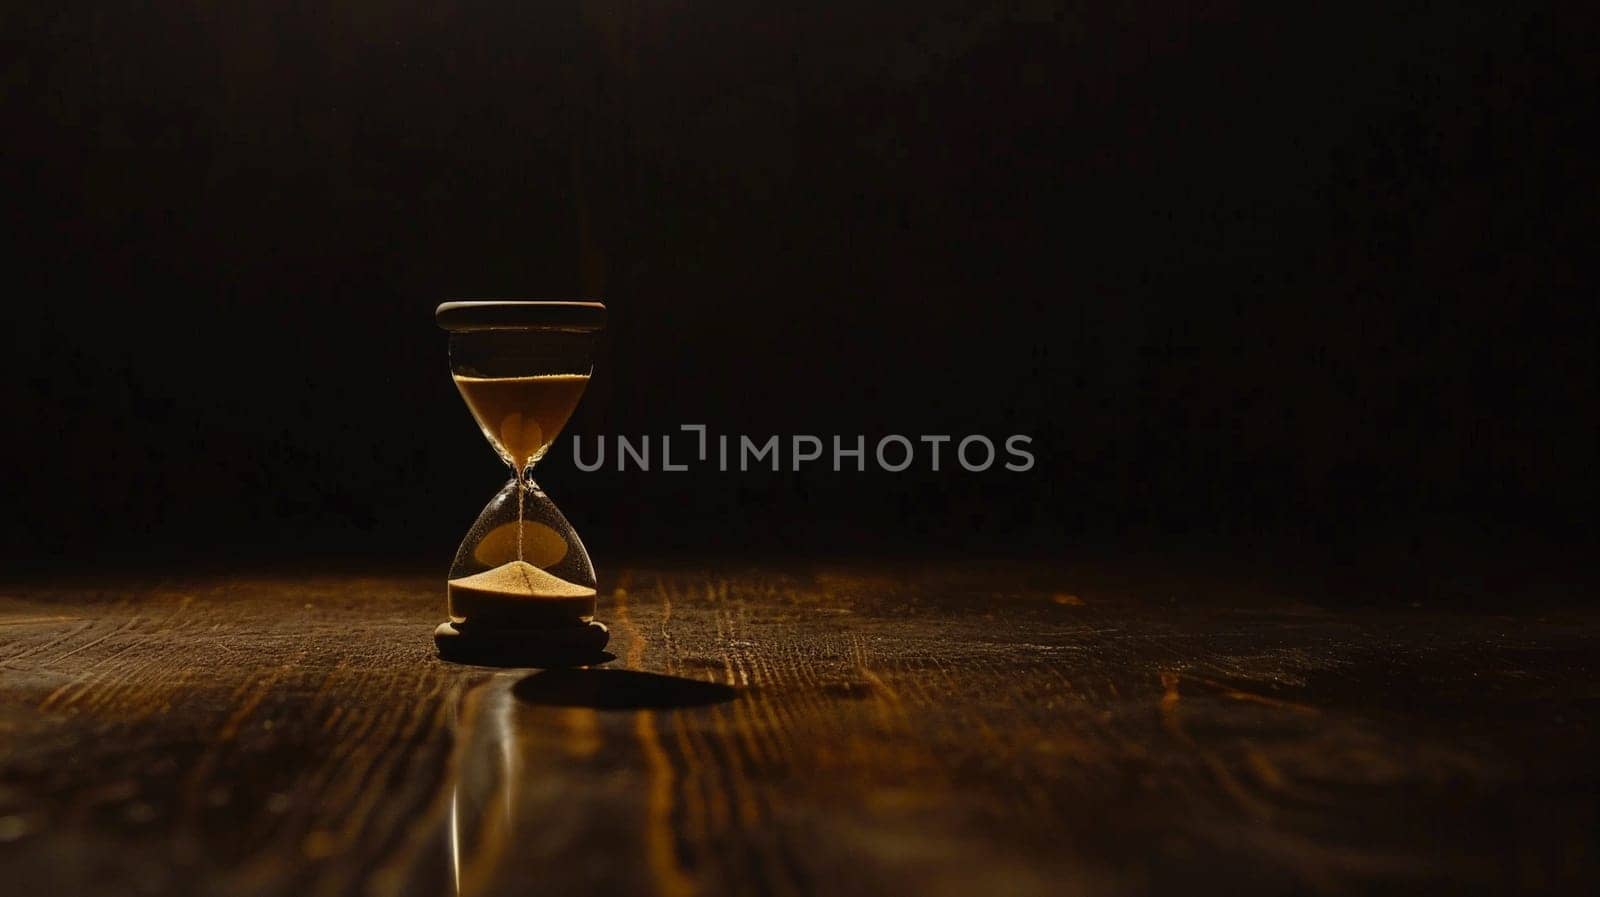 An hourglass, Cinematic photo of An hourglass representing reduced working time.